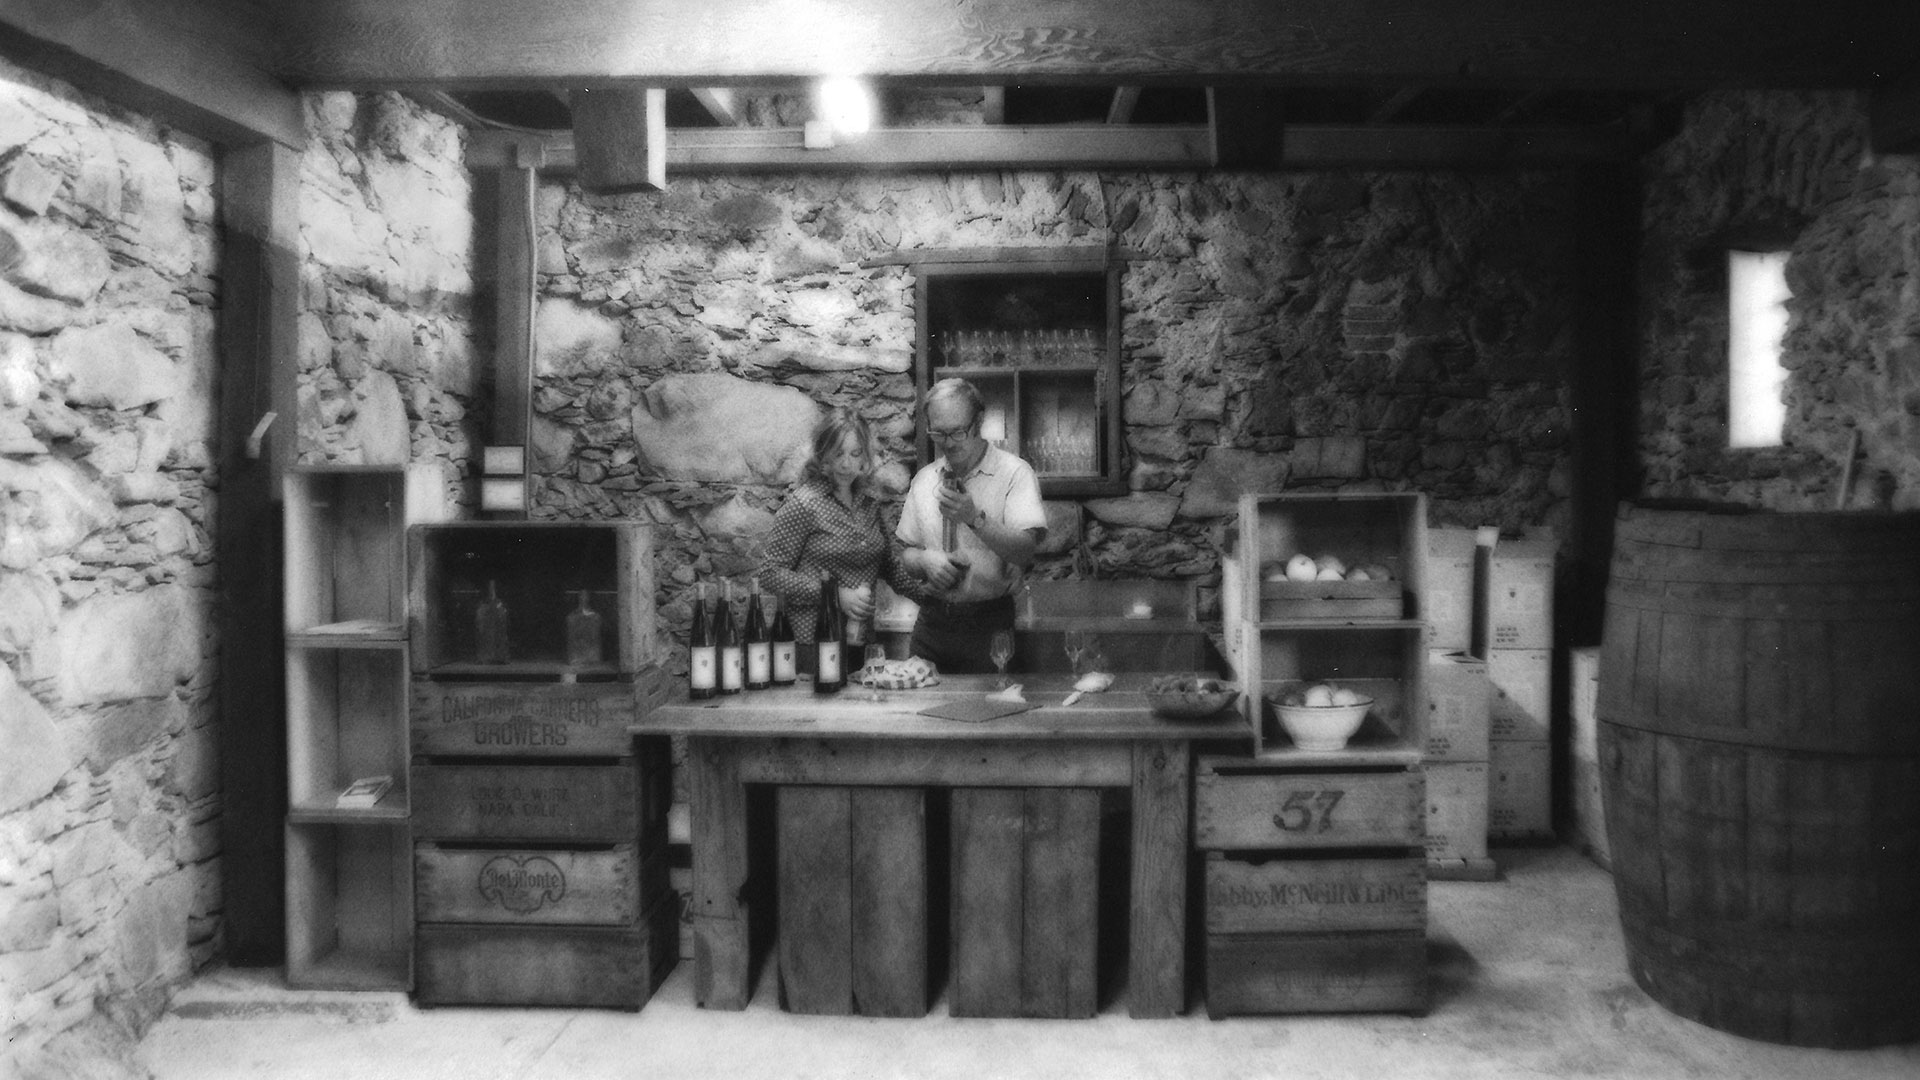 An old black and white photo of a man and woman behind a counter in a room with stone walls and exposed timber beams. A large wine barrel is off to the side.